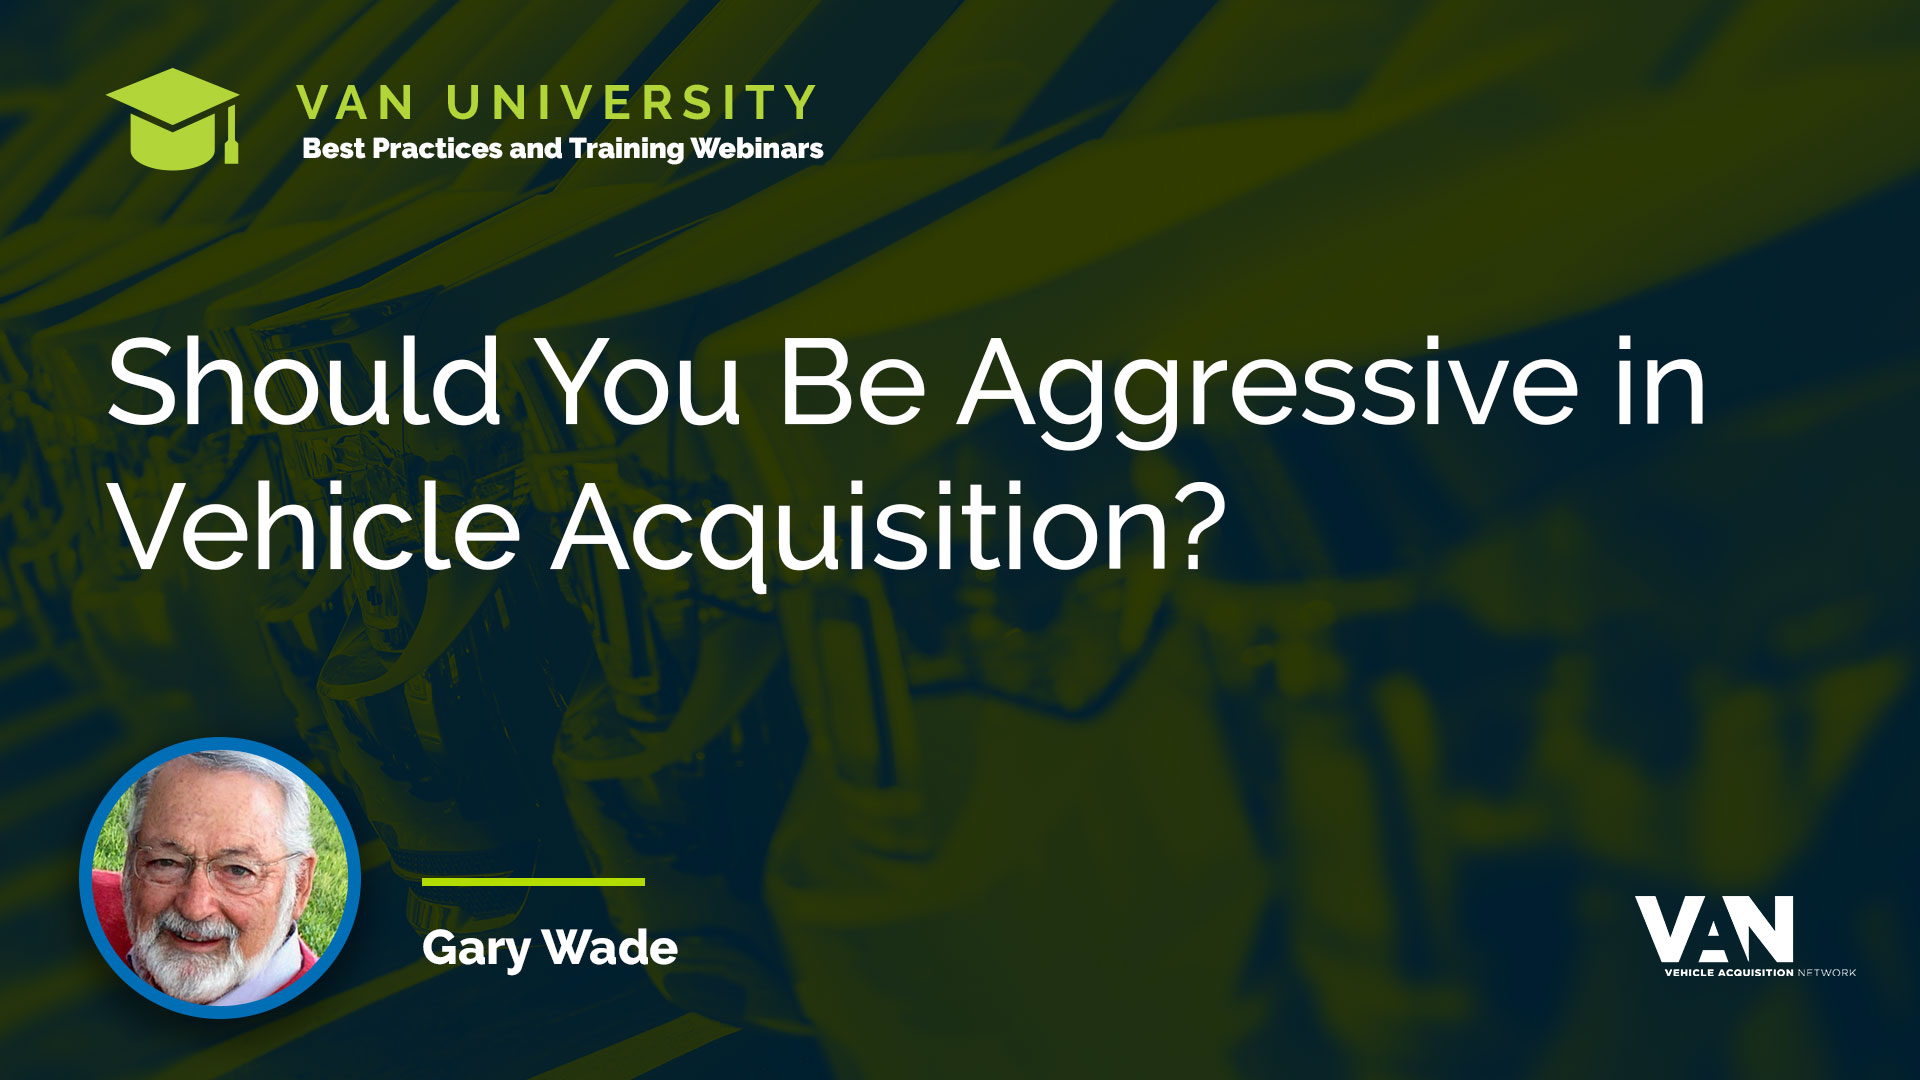 Should you be aggressive in vehicle acquisition from private sellers